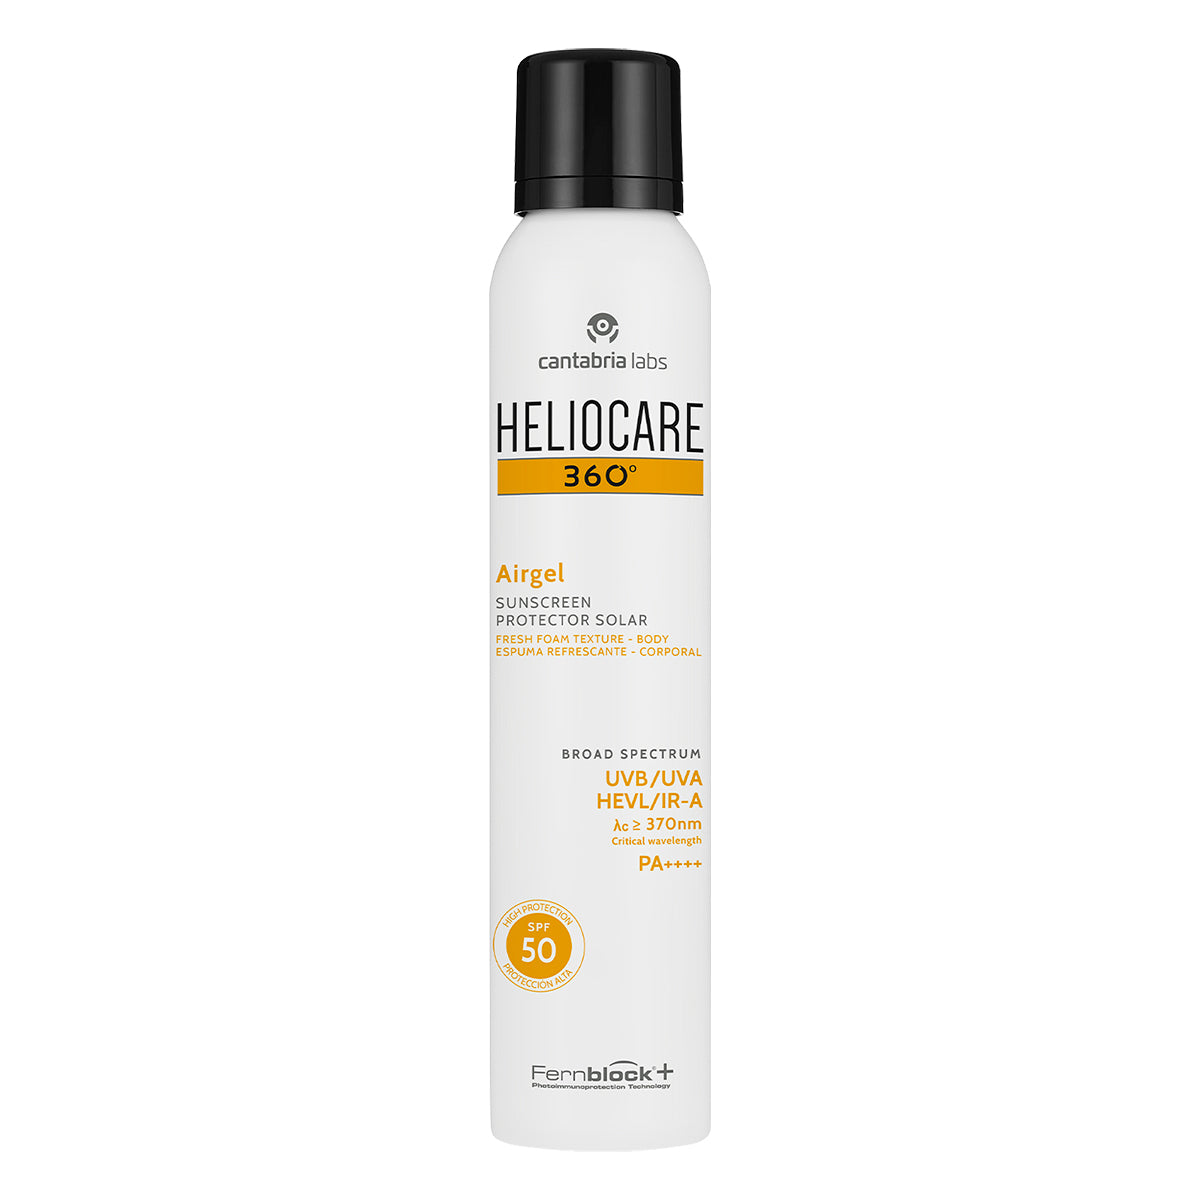 Cantabria Labs Fotoprotector Heliocare 360° Airgel Corporal 200ml.